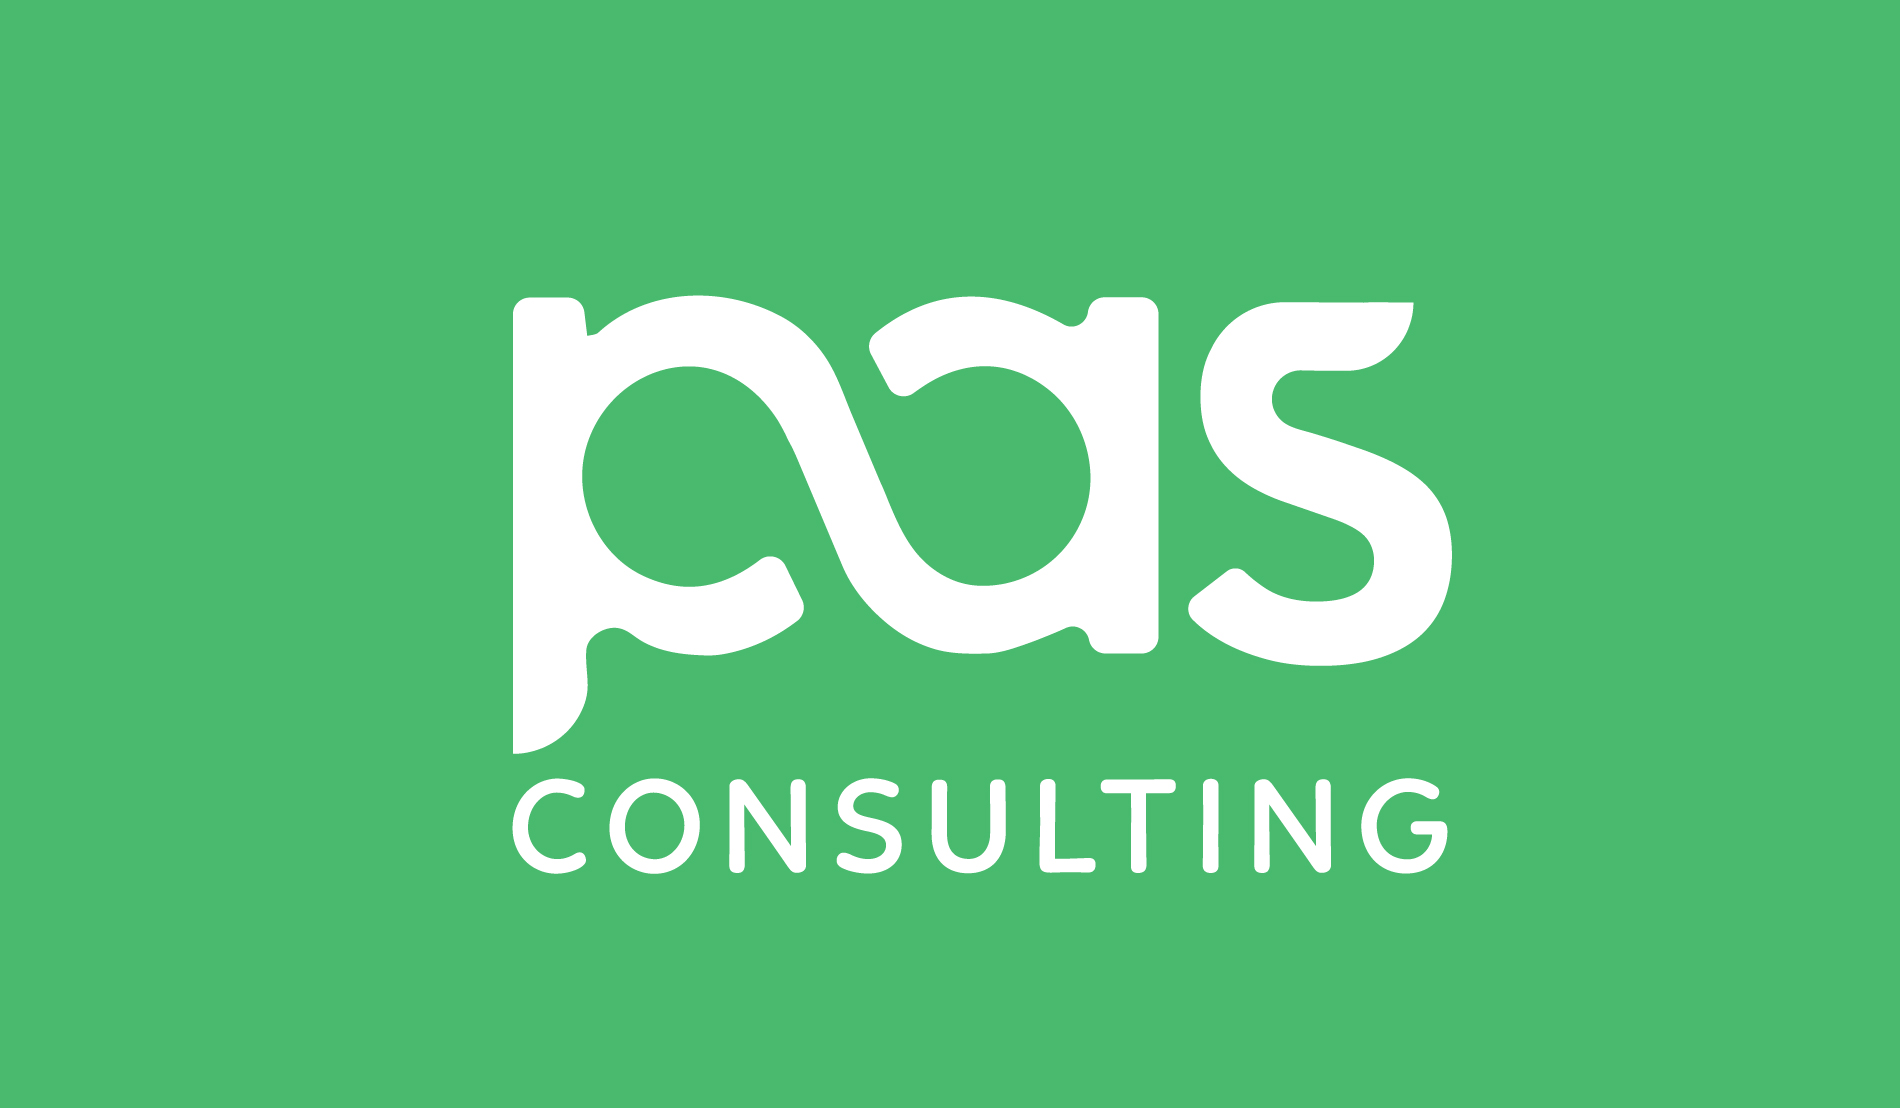 PAS Consulting